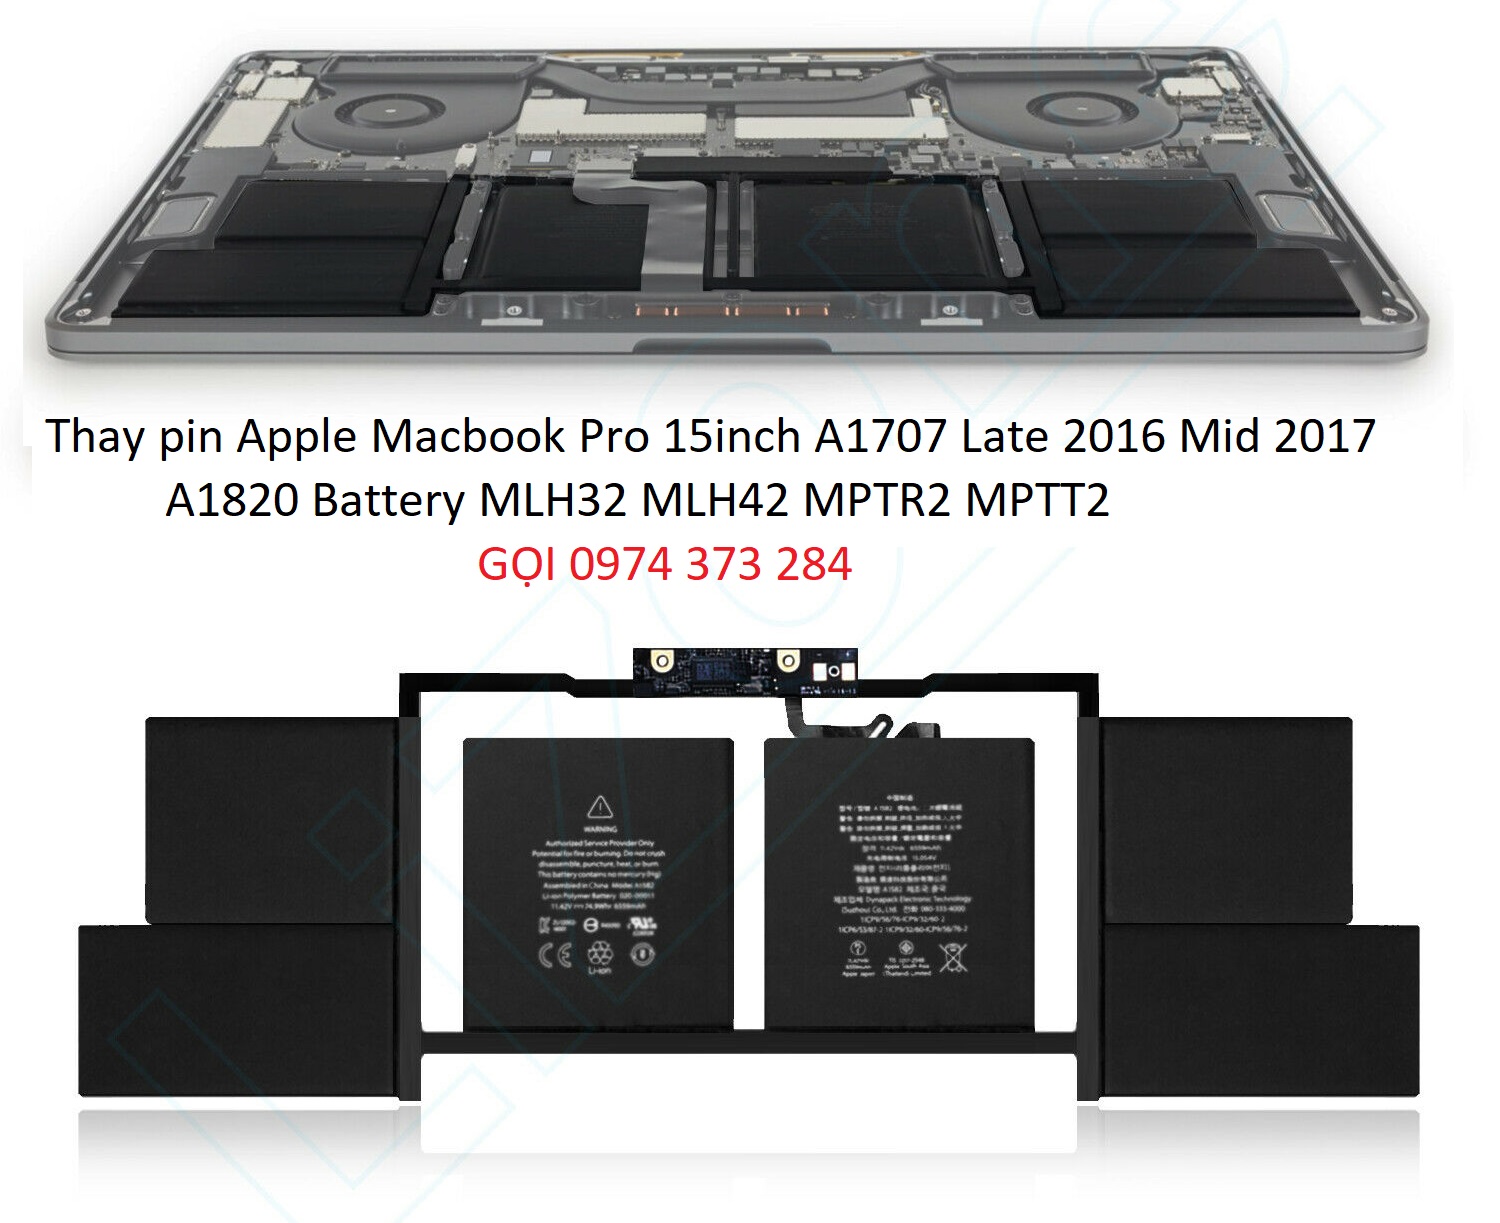 Thay pin Apple Macbook Pro 15inch A1707 Late 2016 Mid 2017 A1820 Battery MLH32 MLH42 MPTR2 MPTT2 